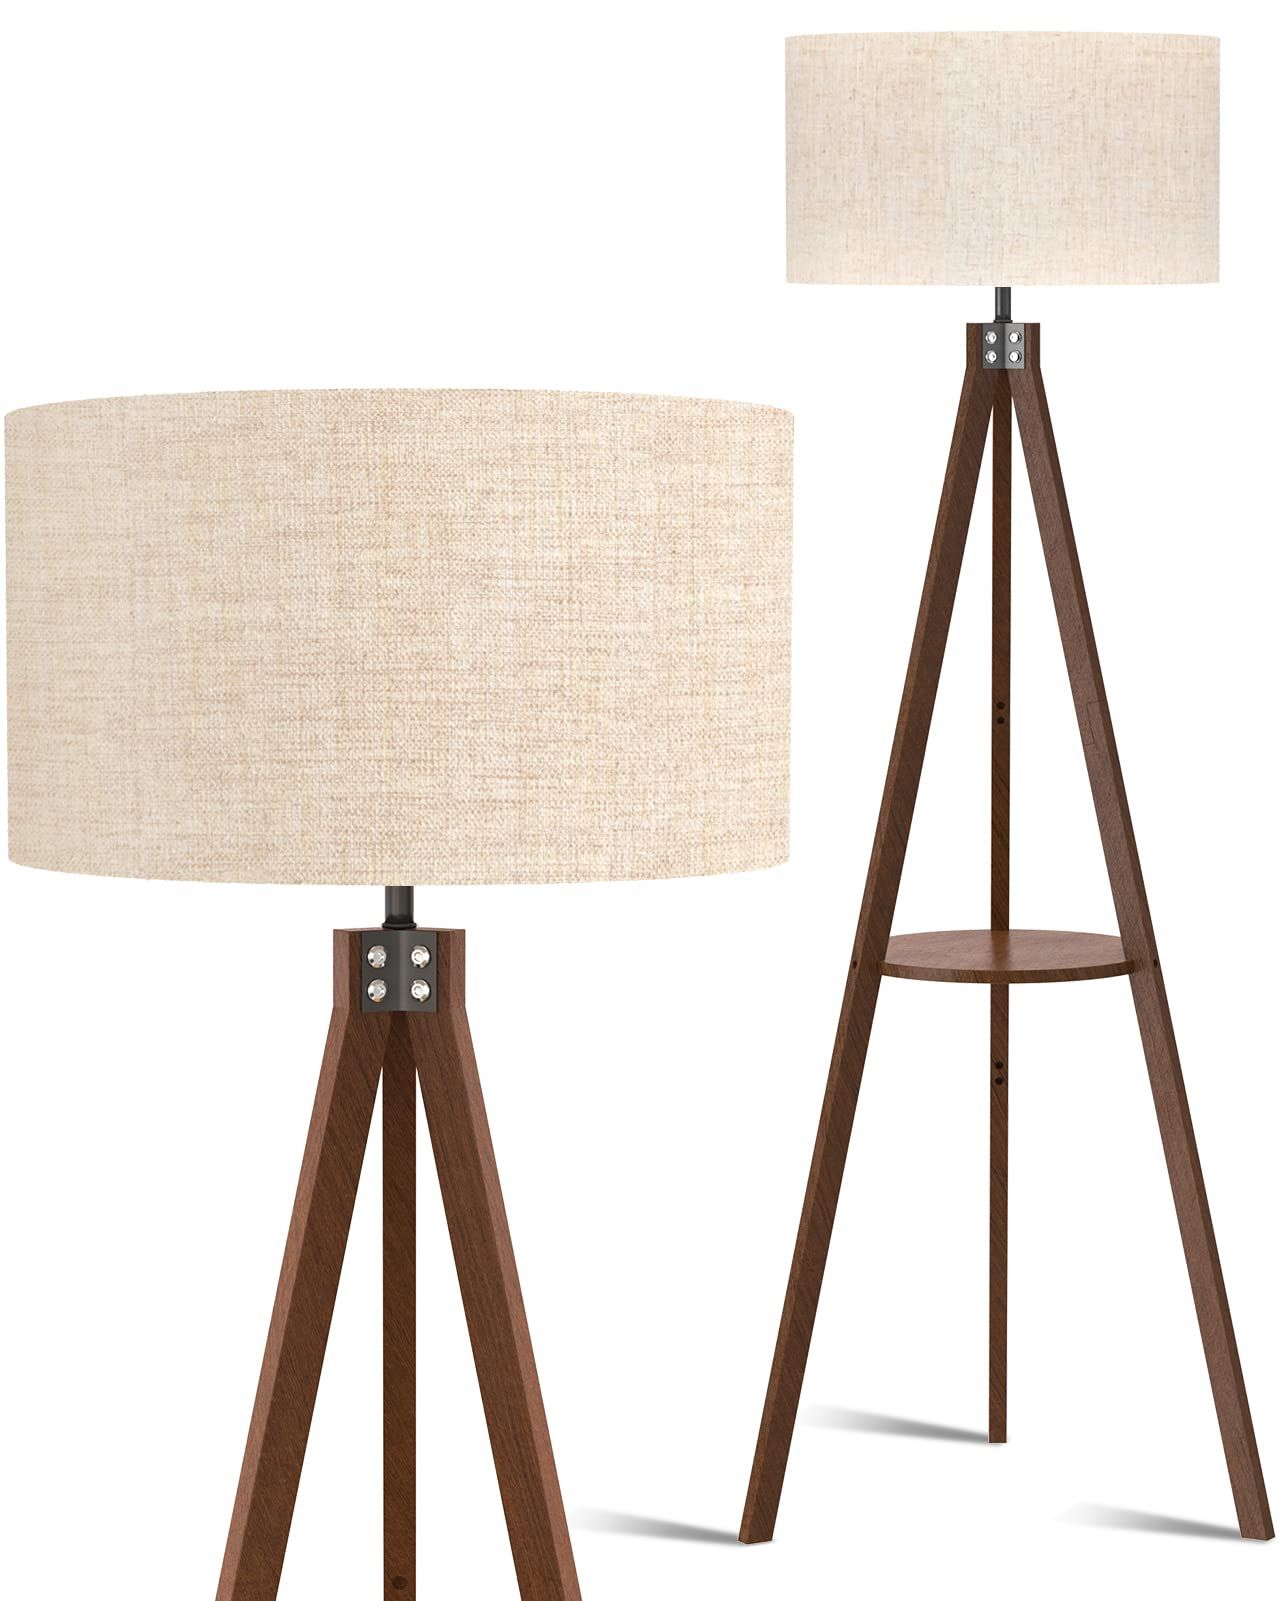 Mid Century Standing Lamps Regarding Widely Used Lepower Tripod Floor Lamp, Mid Century Standing Lamp With Shelf, Modern  Design Wood Floor Lamps For (View 6 of 15)